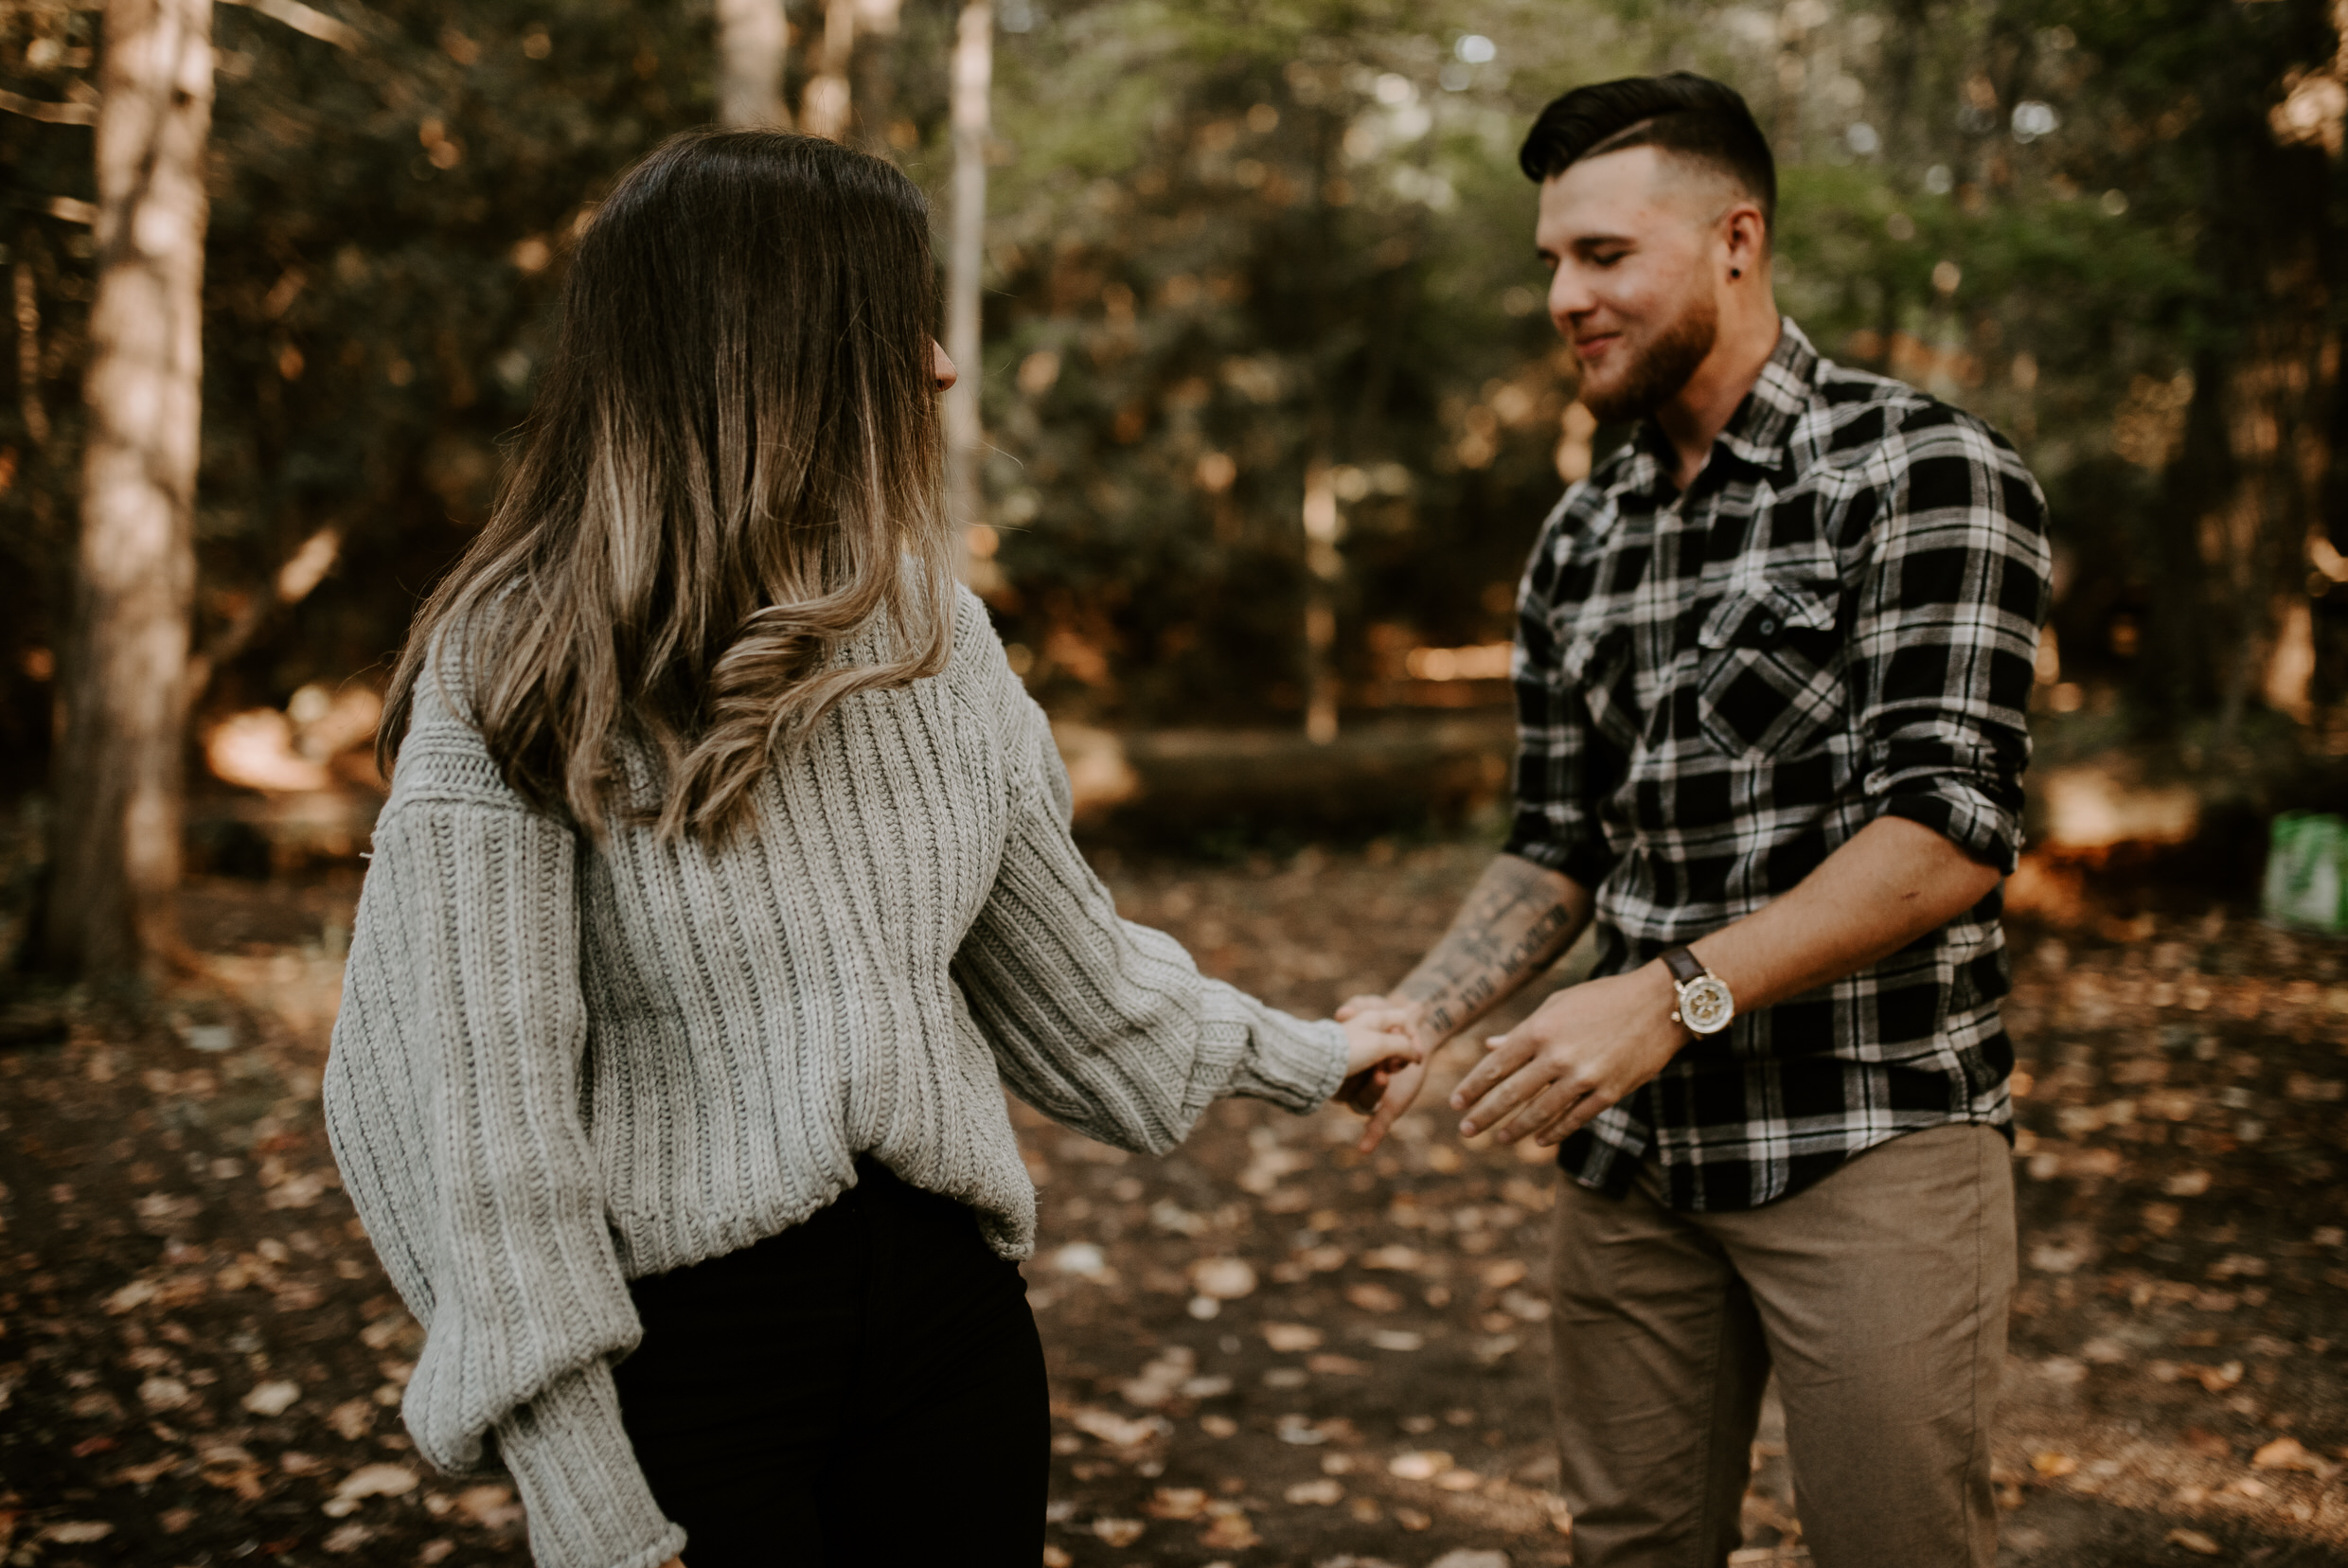 Muskoka Engagement Session - holding hands in the woods